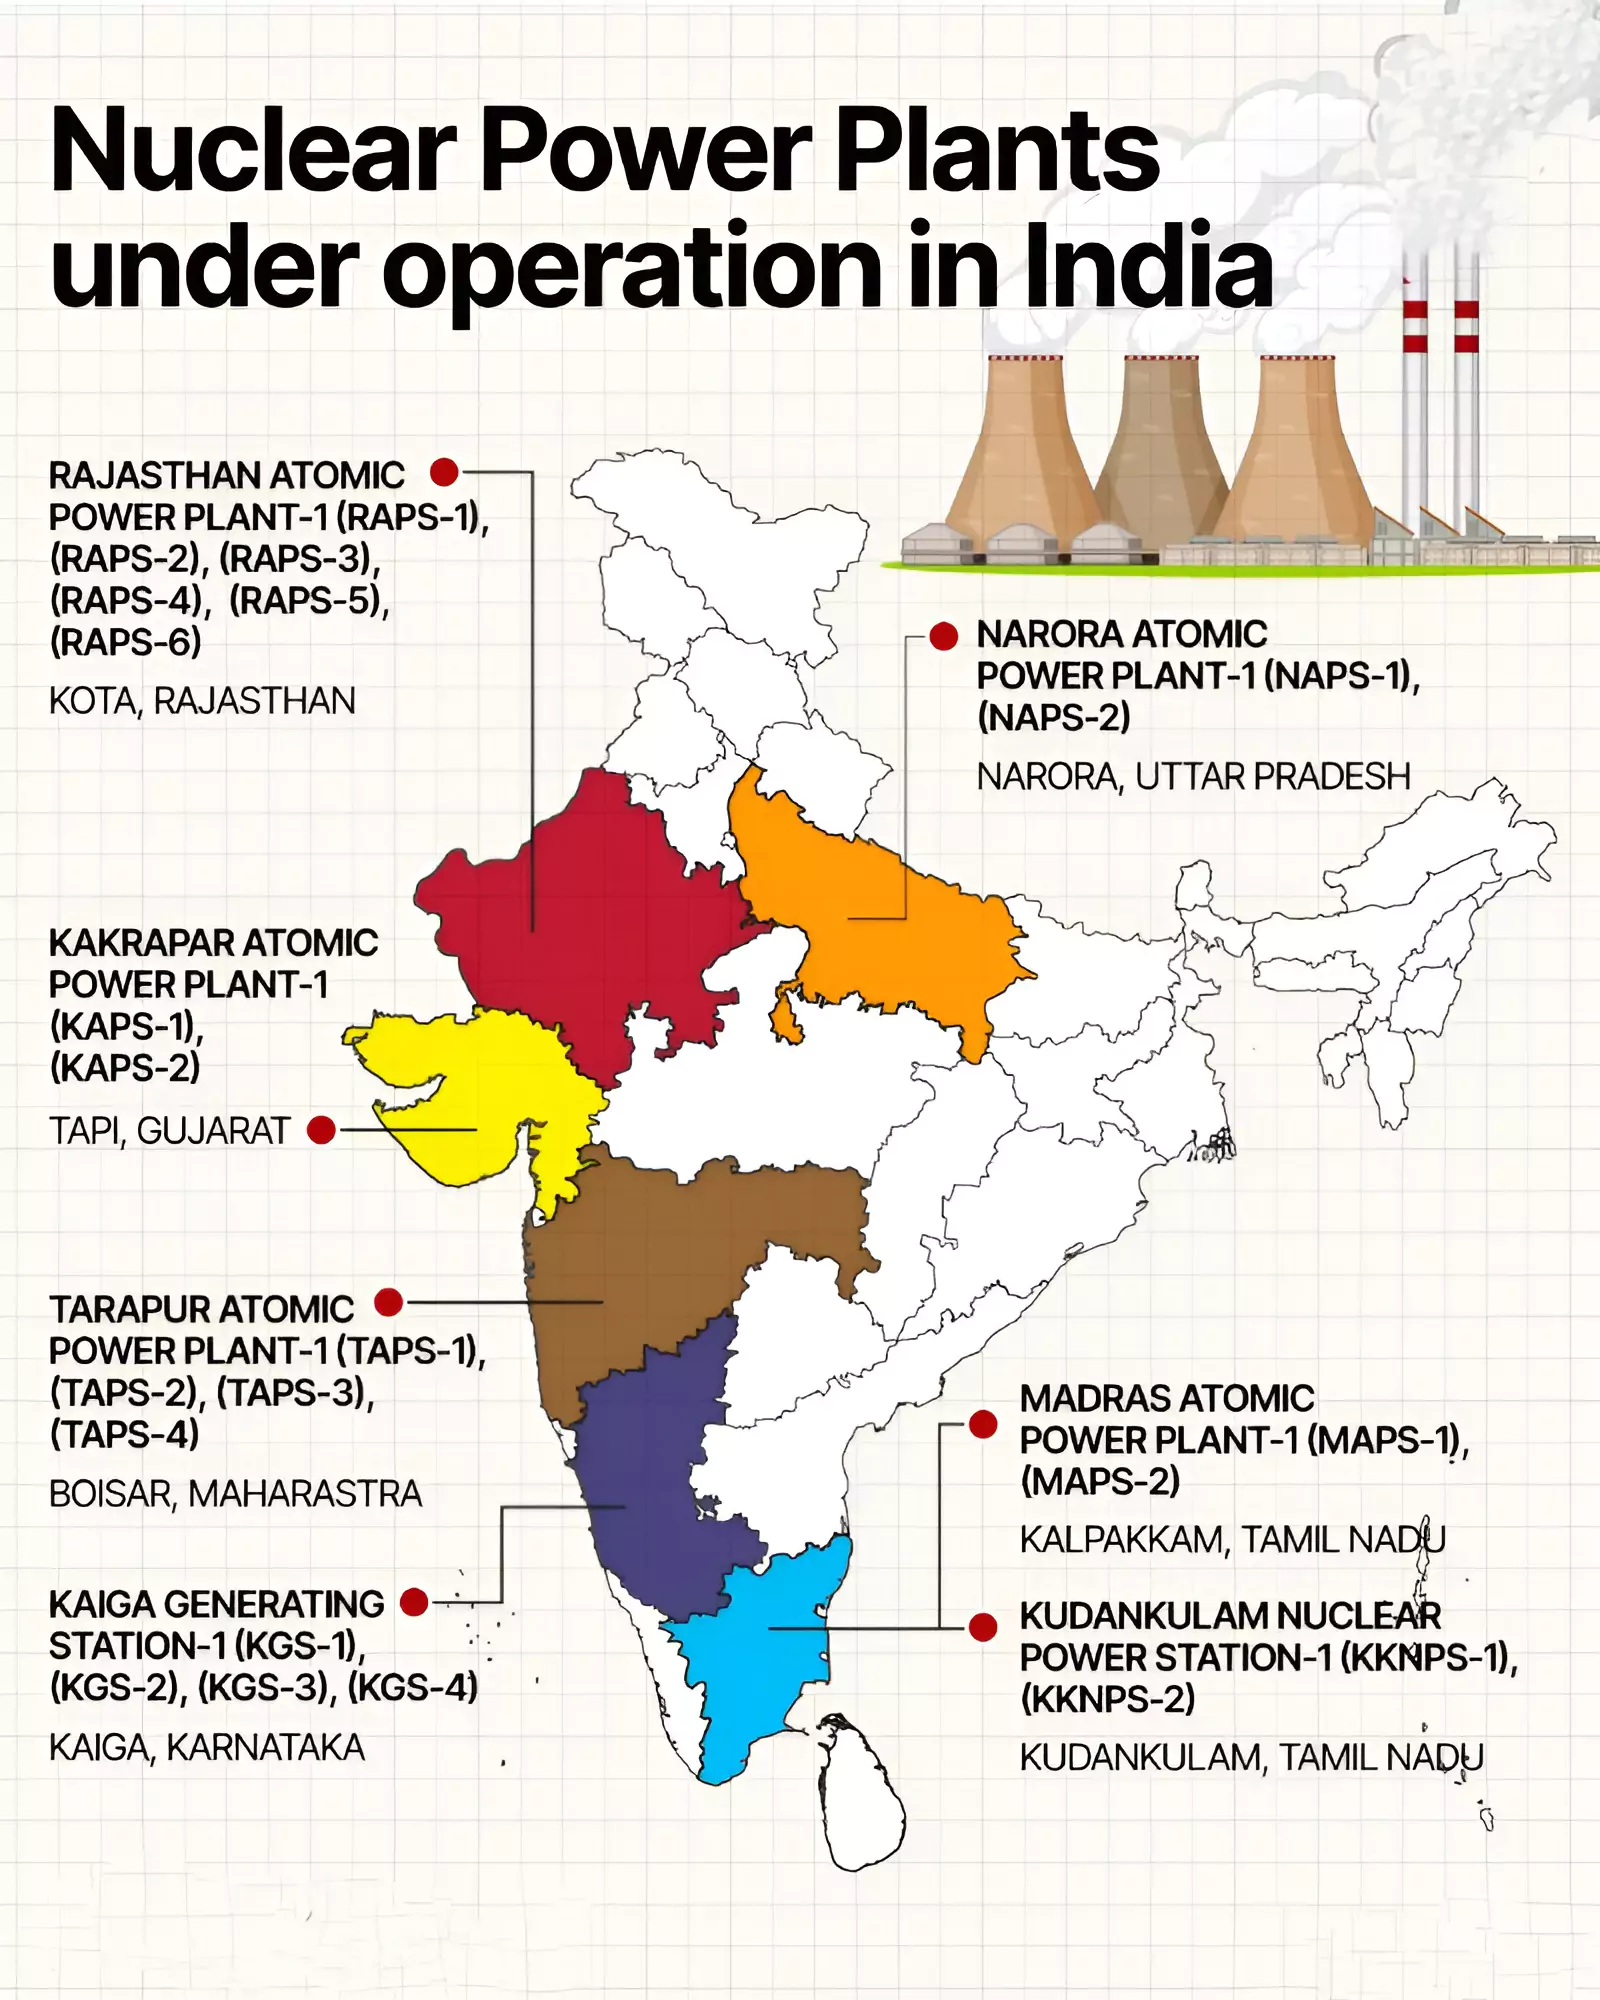 India’s Nuclear Energy Programme